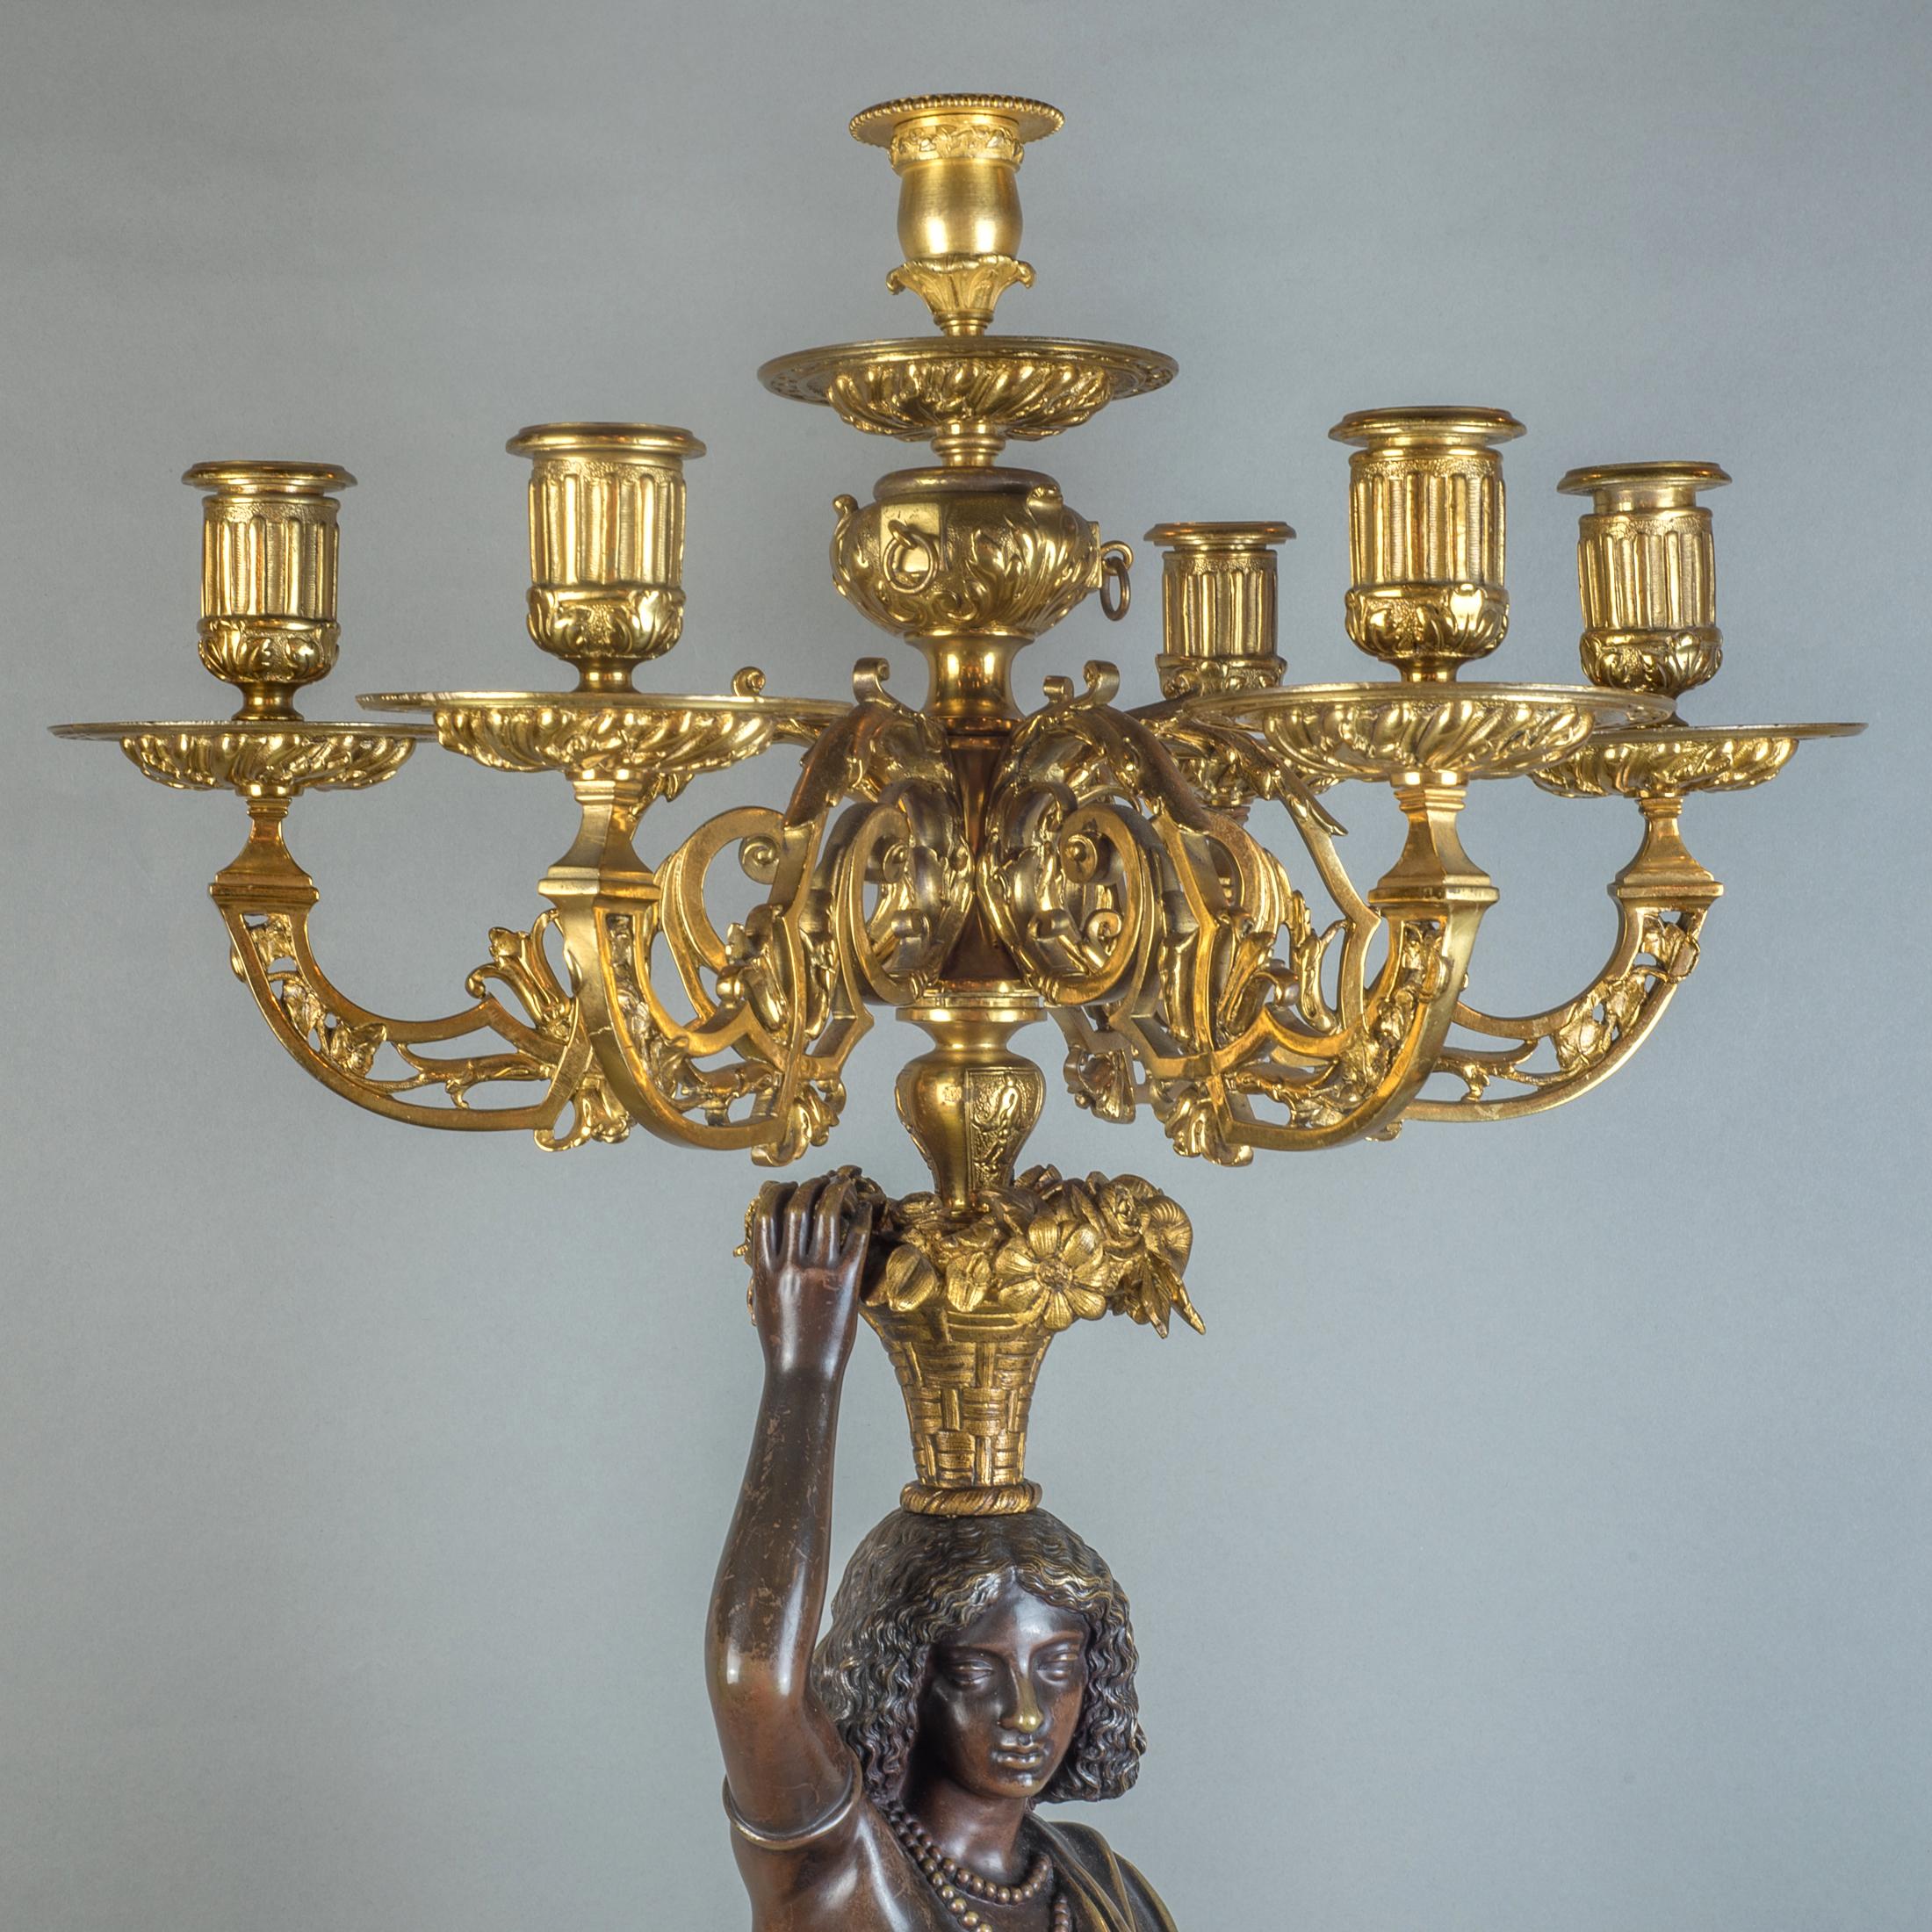  Pair of Gilt and Patinated Bronze Nubian Figural Six-Light Candelabras For Sale 5